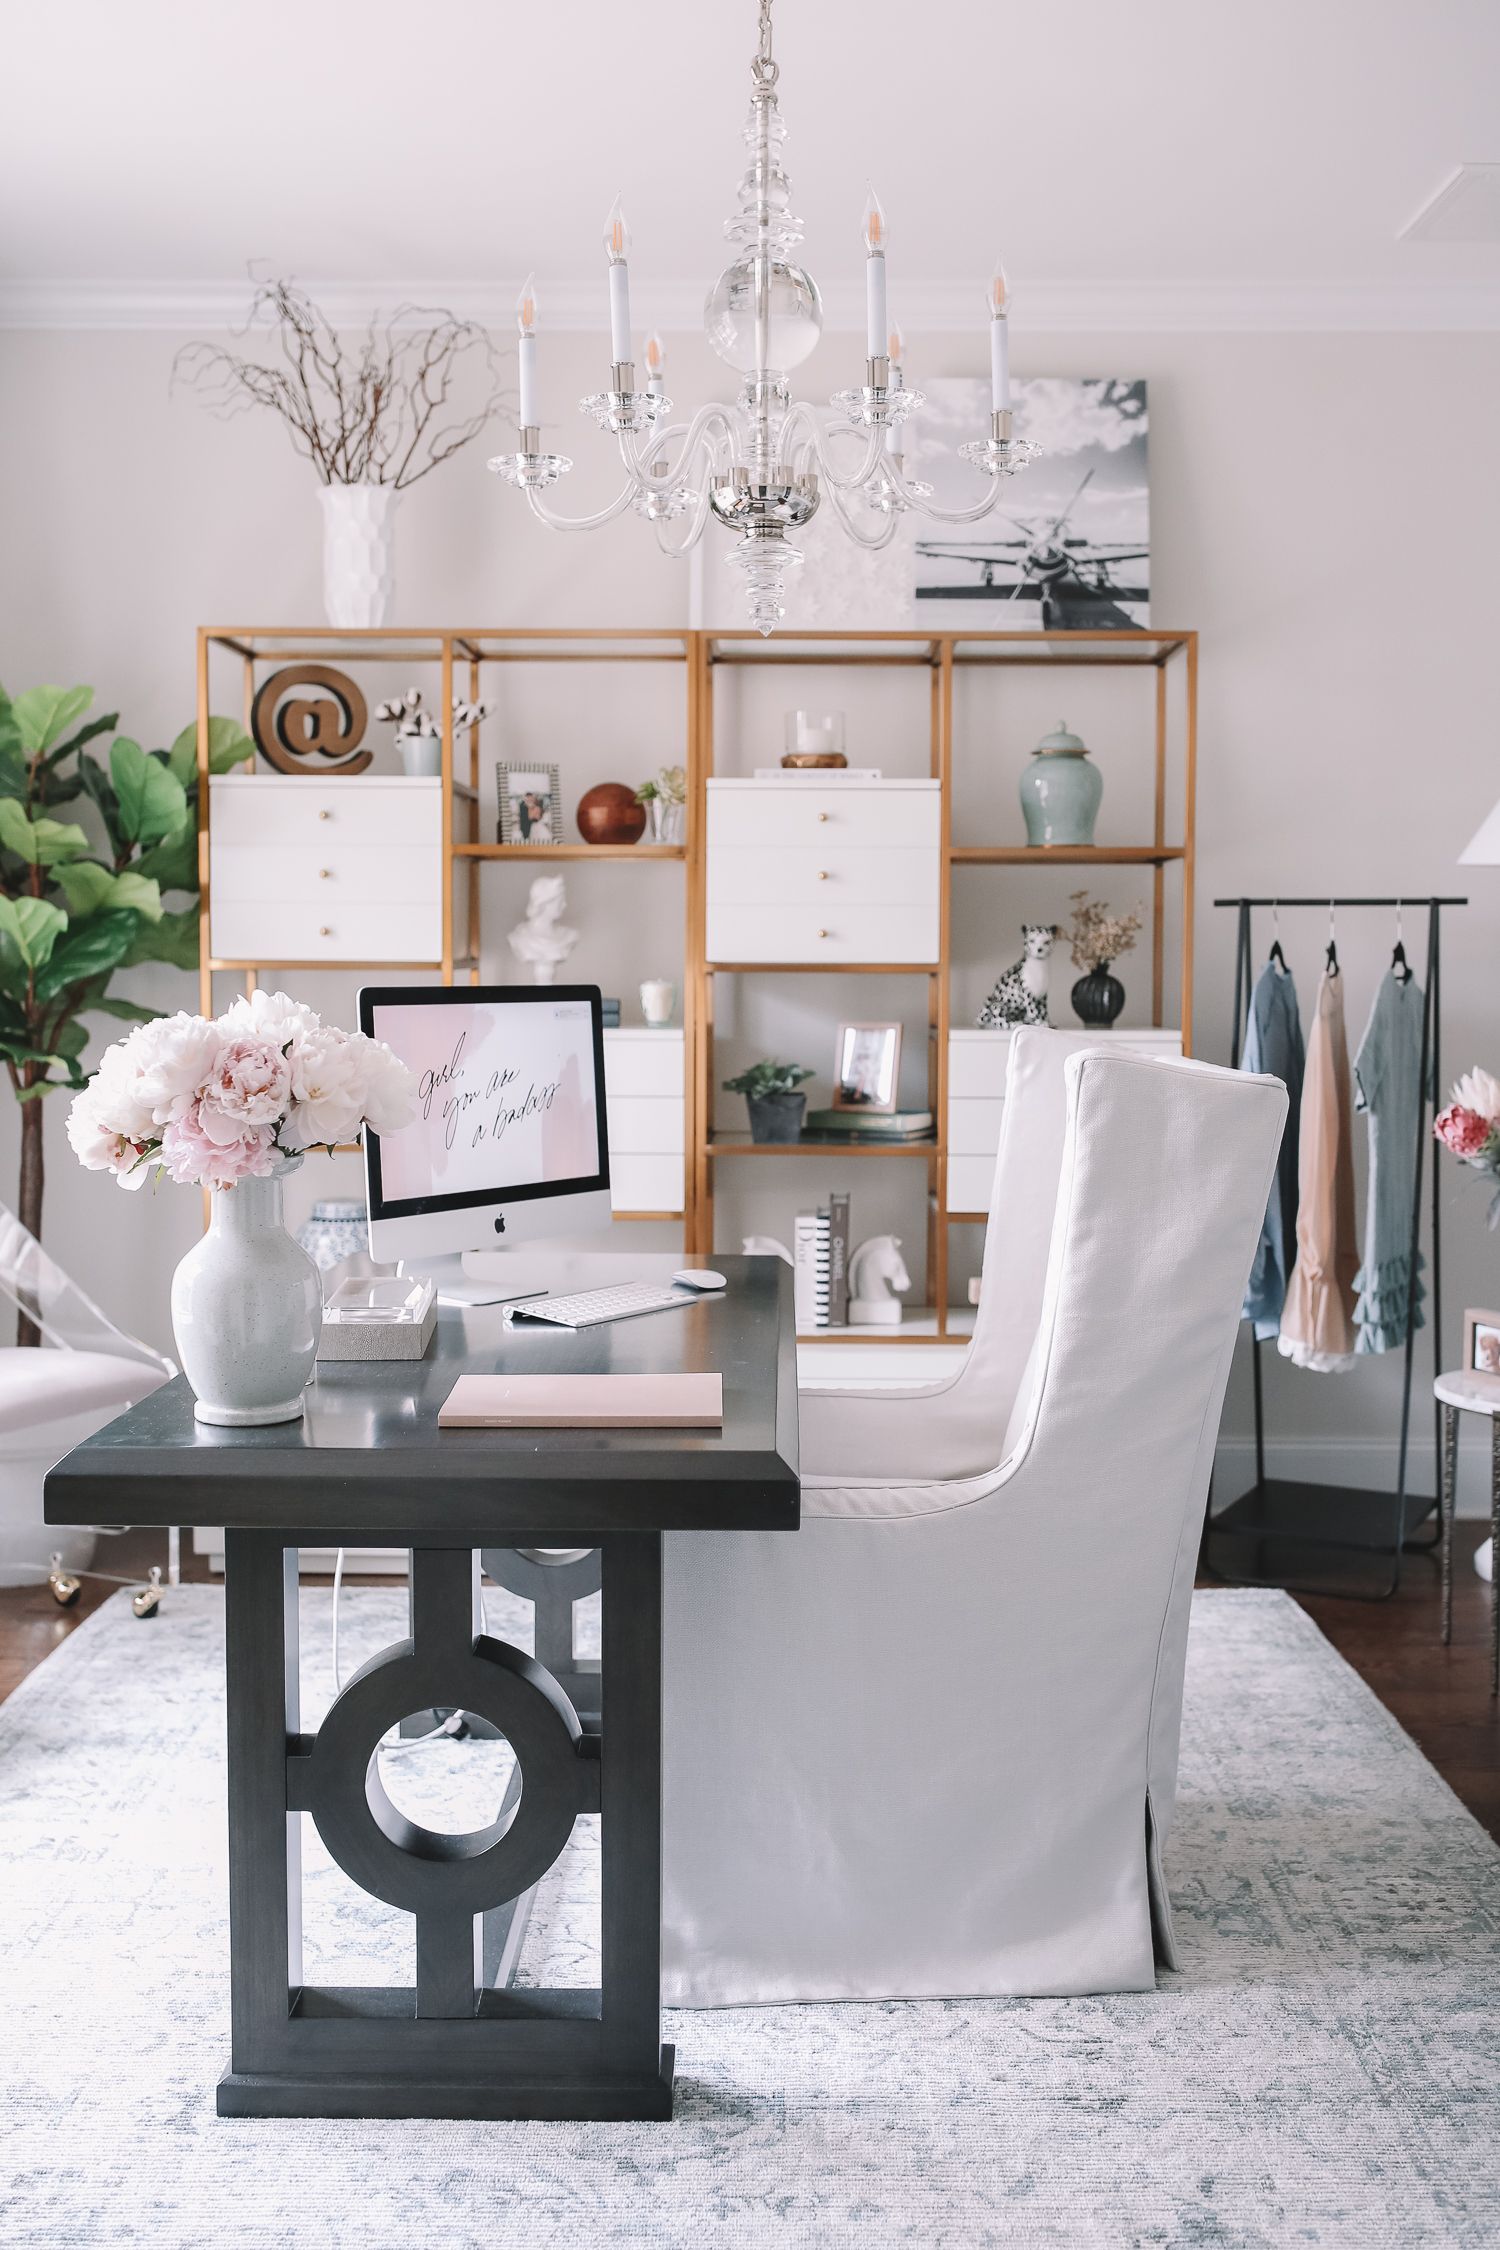 19 Glam Home Office Decor Ideas to Transform Your Workspace - A